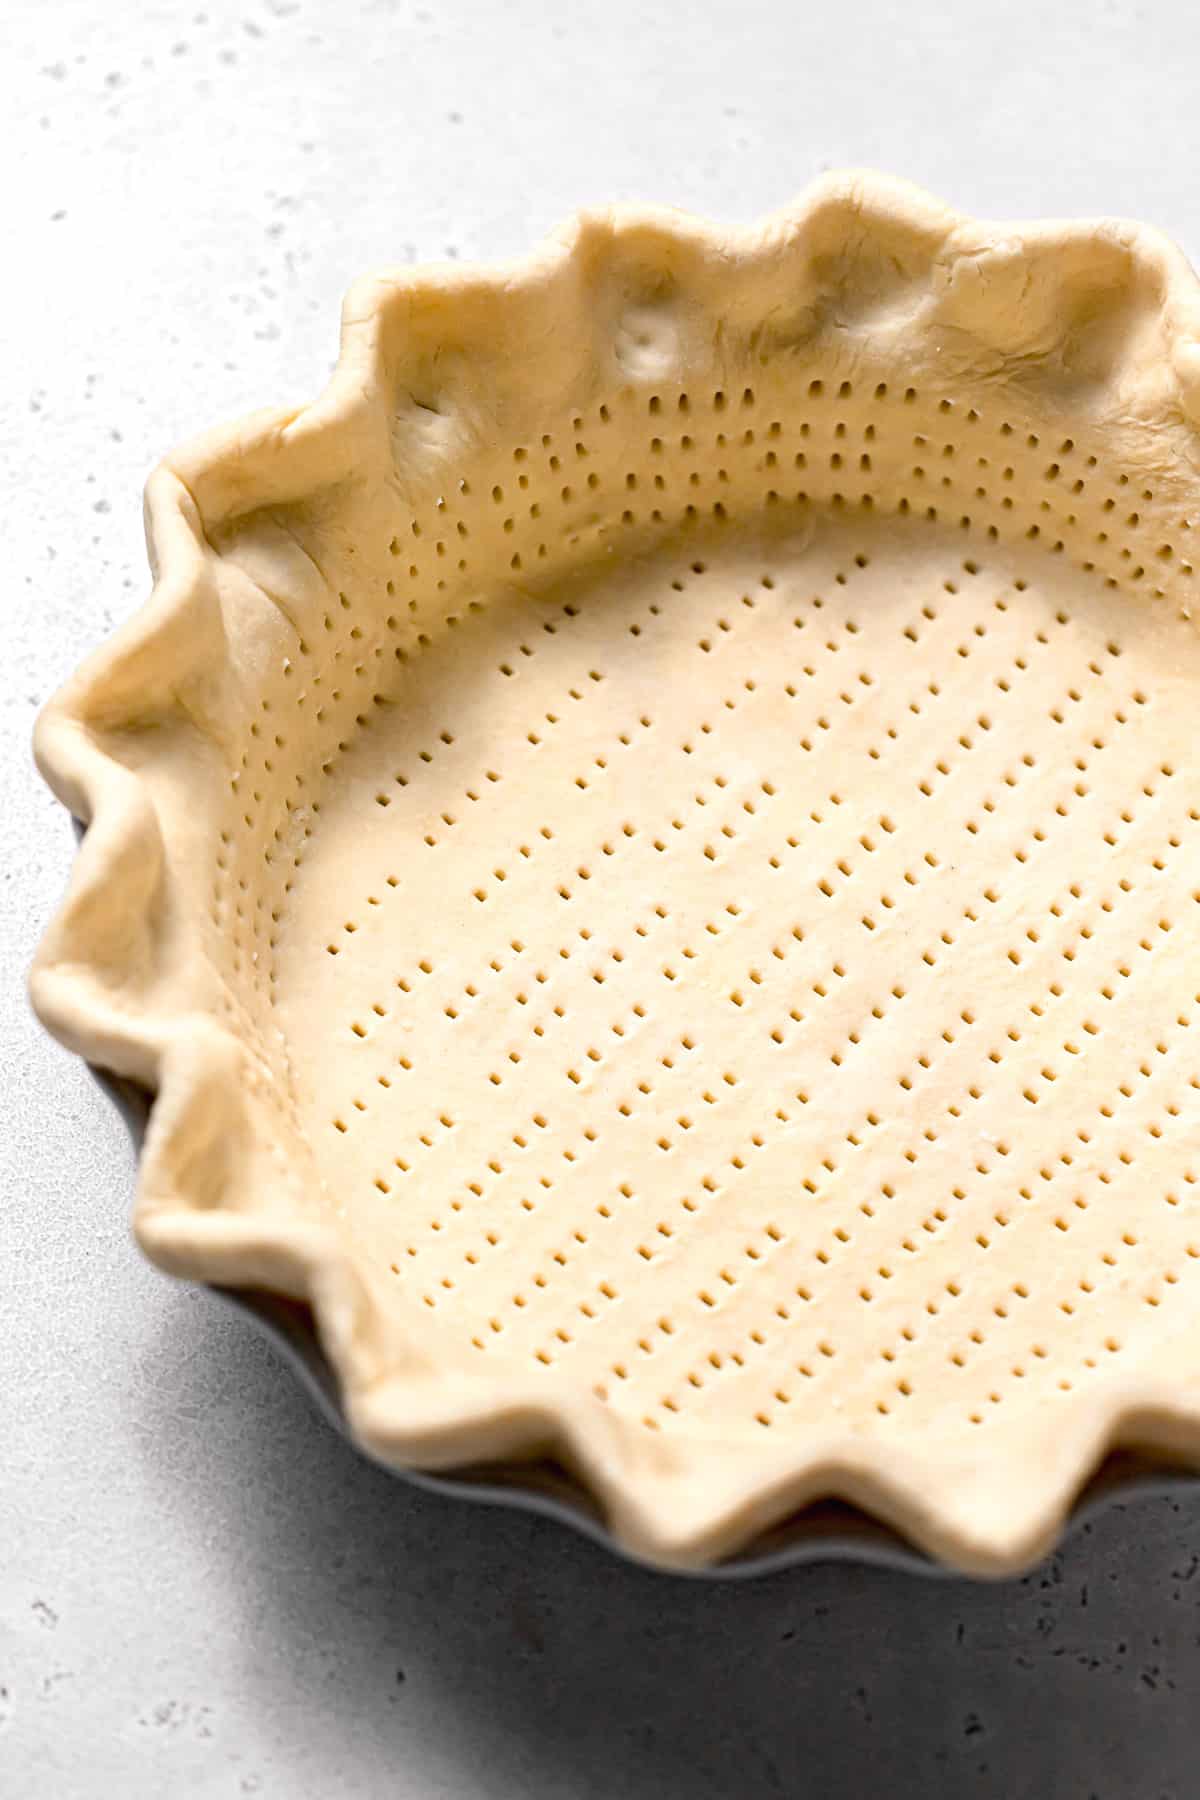 crimped and docked pie dough in pie dish